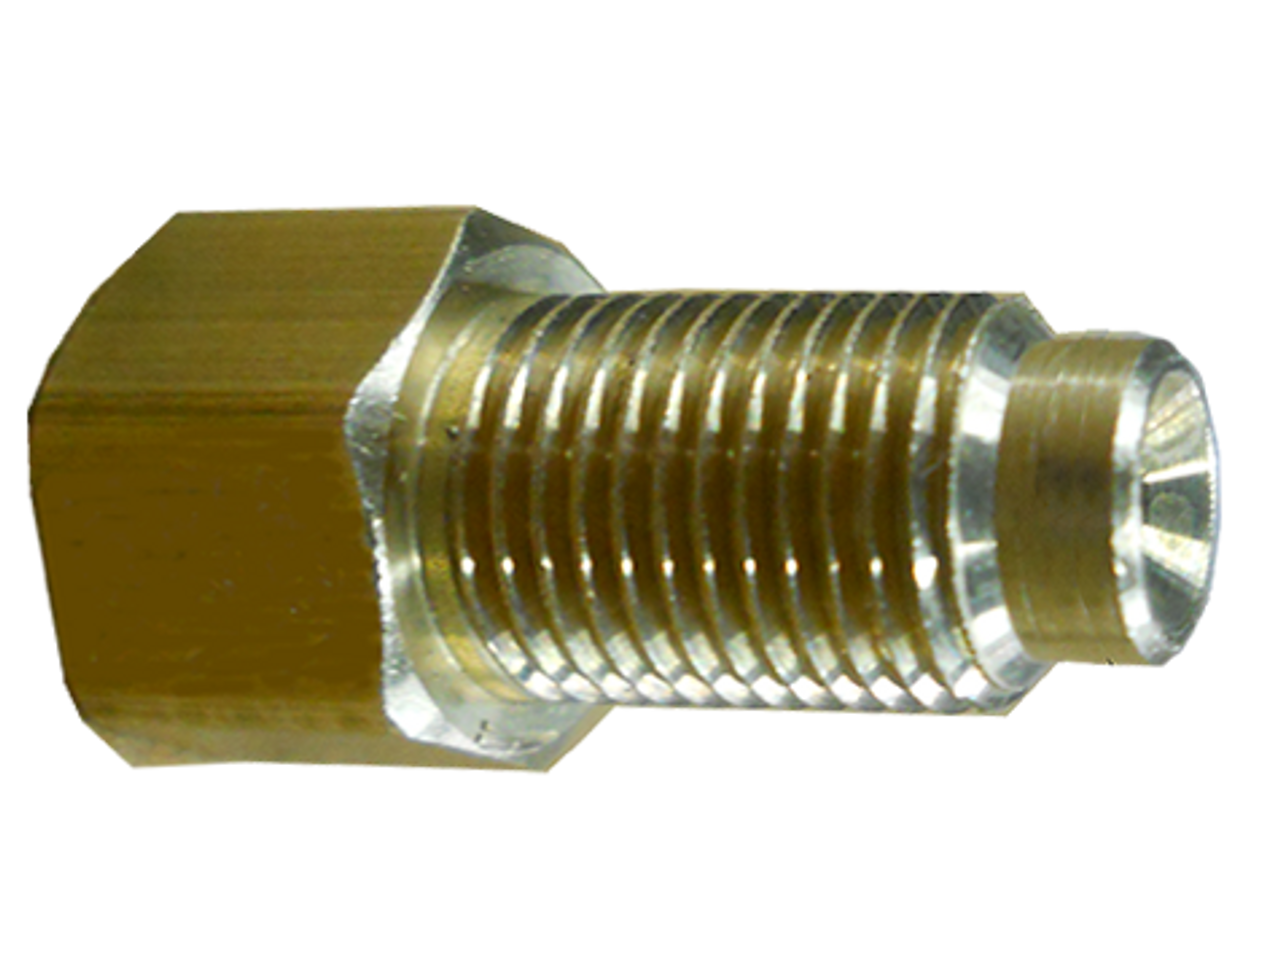 3/16 (3/8"-24) x 1/4 (7/16"-24)  Brass Female 45° SAE Inverted Flare - Male 45° SAE Inverted Flare Adapter  WH-7818